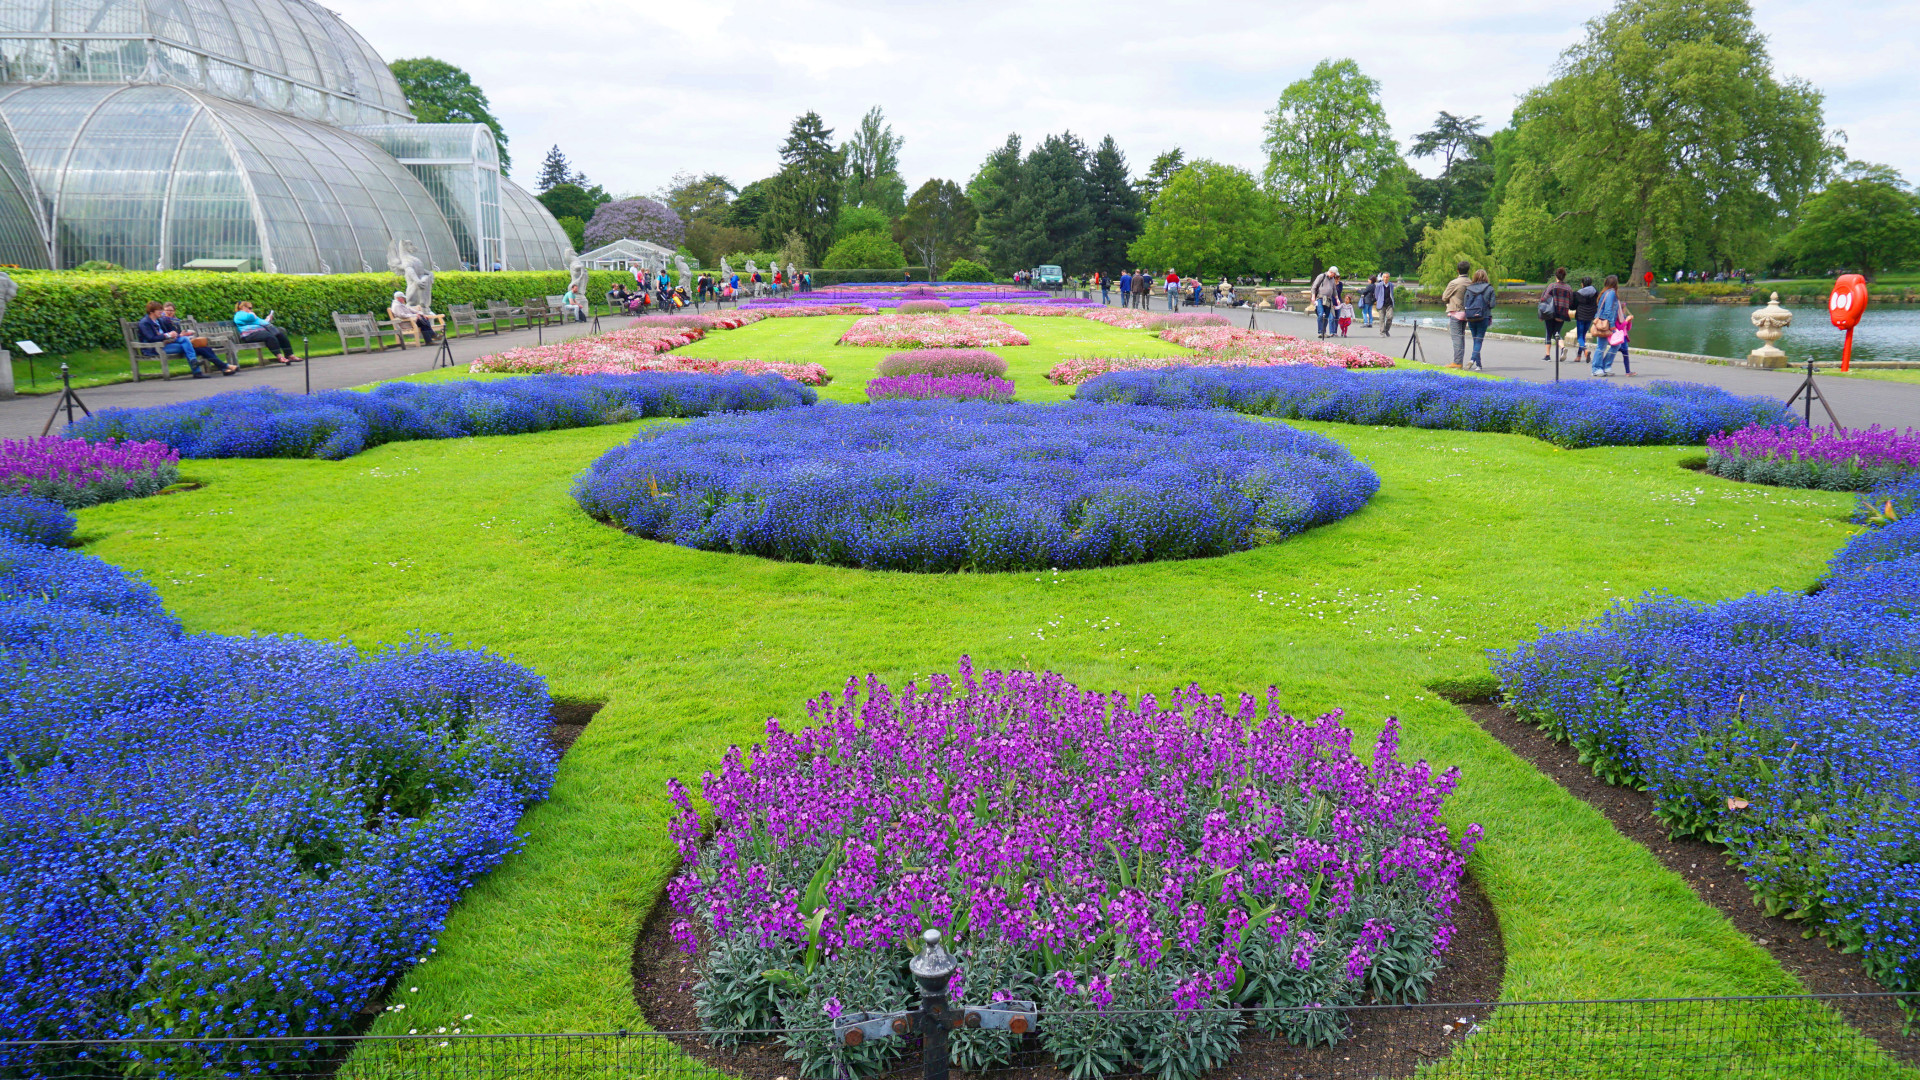 The famous Royal Botanic Gardens and the glasshouse galleries at Kew. <p>You may also like:<a href="https://www.starsinsider.com/n/285049?utm_source=msn.com&utm_medium=display&utm_campaign=referral_description&utm_content=344596v2en-us"> The uncomfortable stories behind famous film and TV love scenes </a></p>